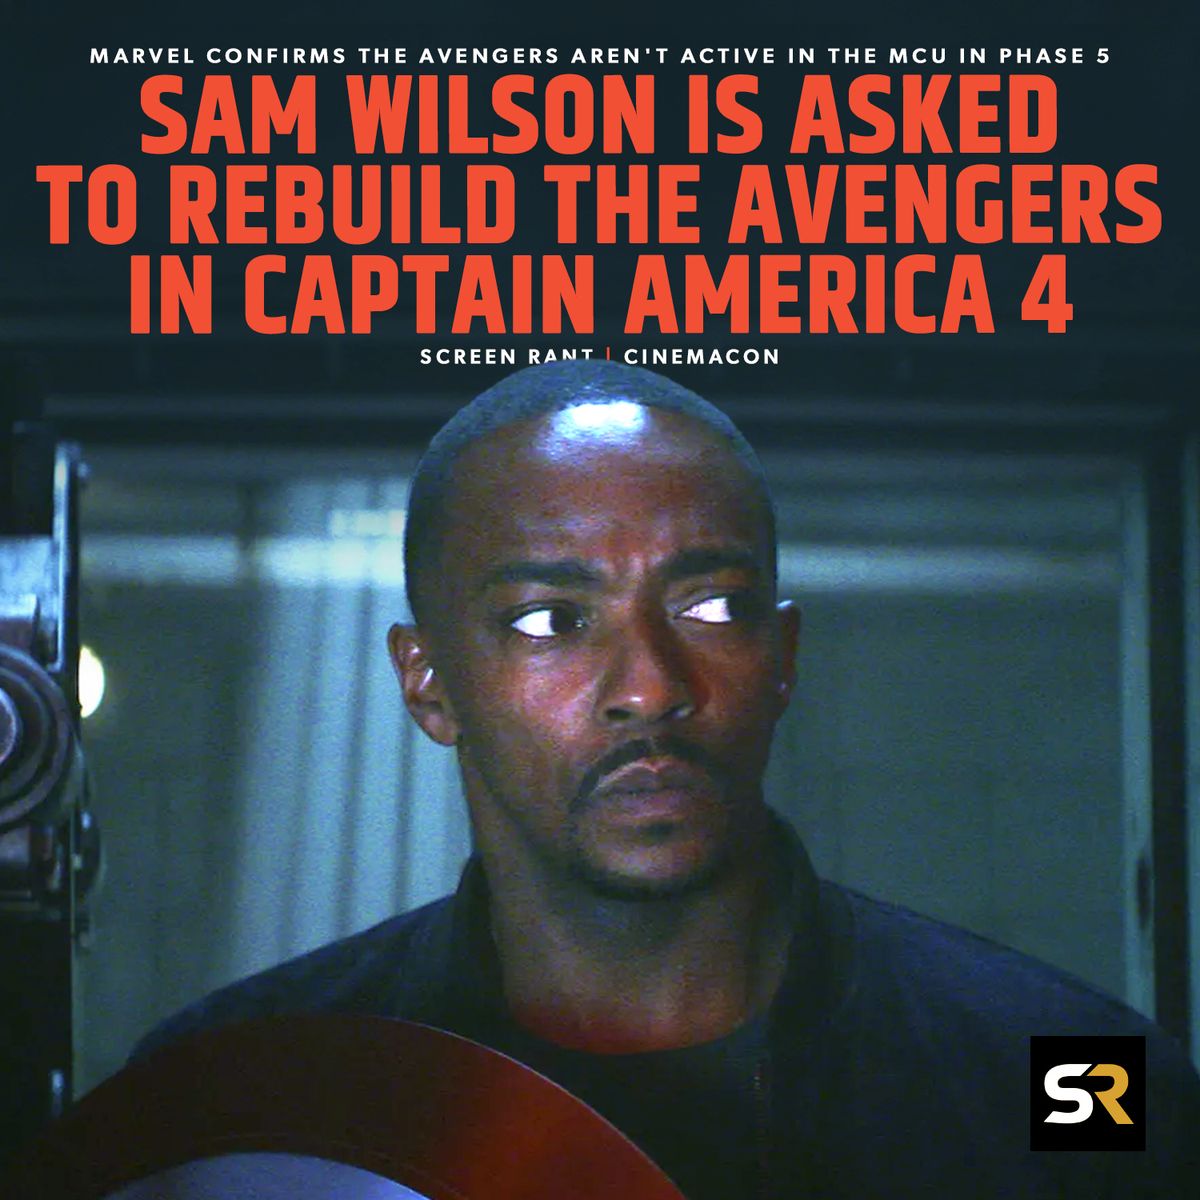 Screen Rant saw the first footage for #CaptainAmerica: Brave New World at CinemaCon where President Thaddeus Ross asks Sam Wilson to rebuild the Avengers. The footage also acknowledges Harrison Ford in the role as Sam says 'I’m not used to the new look.' bit.ly/3VXI0dg